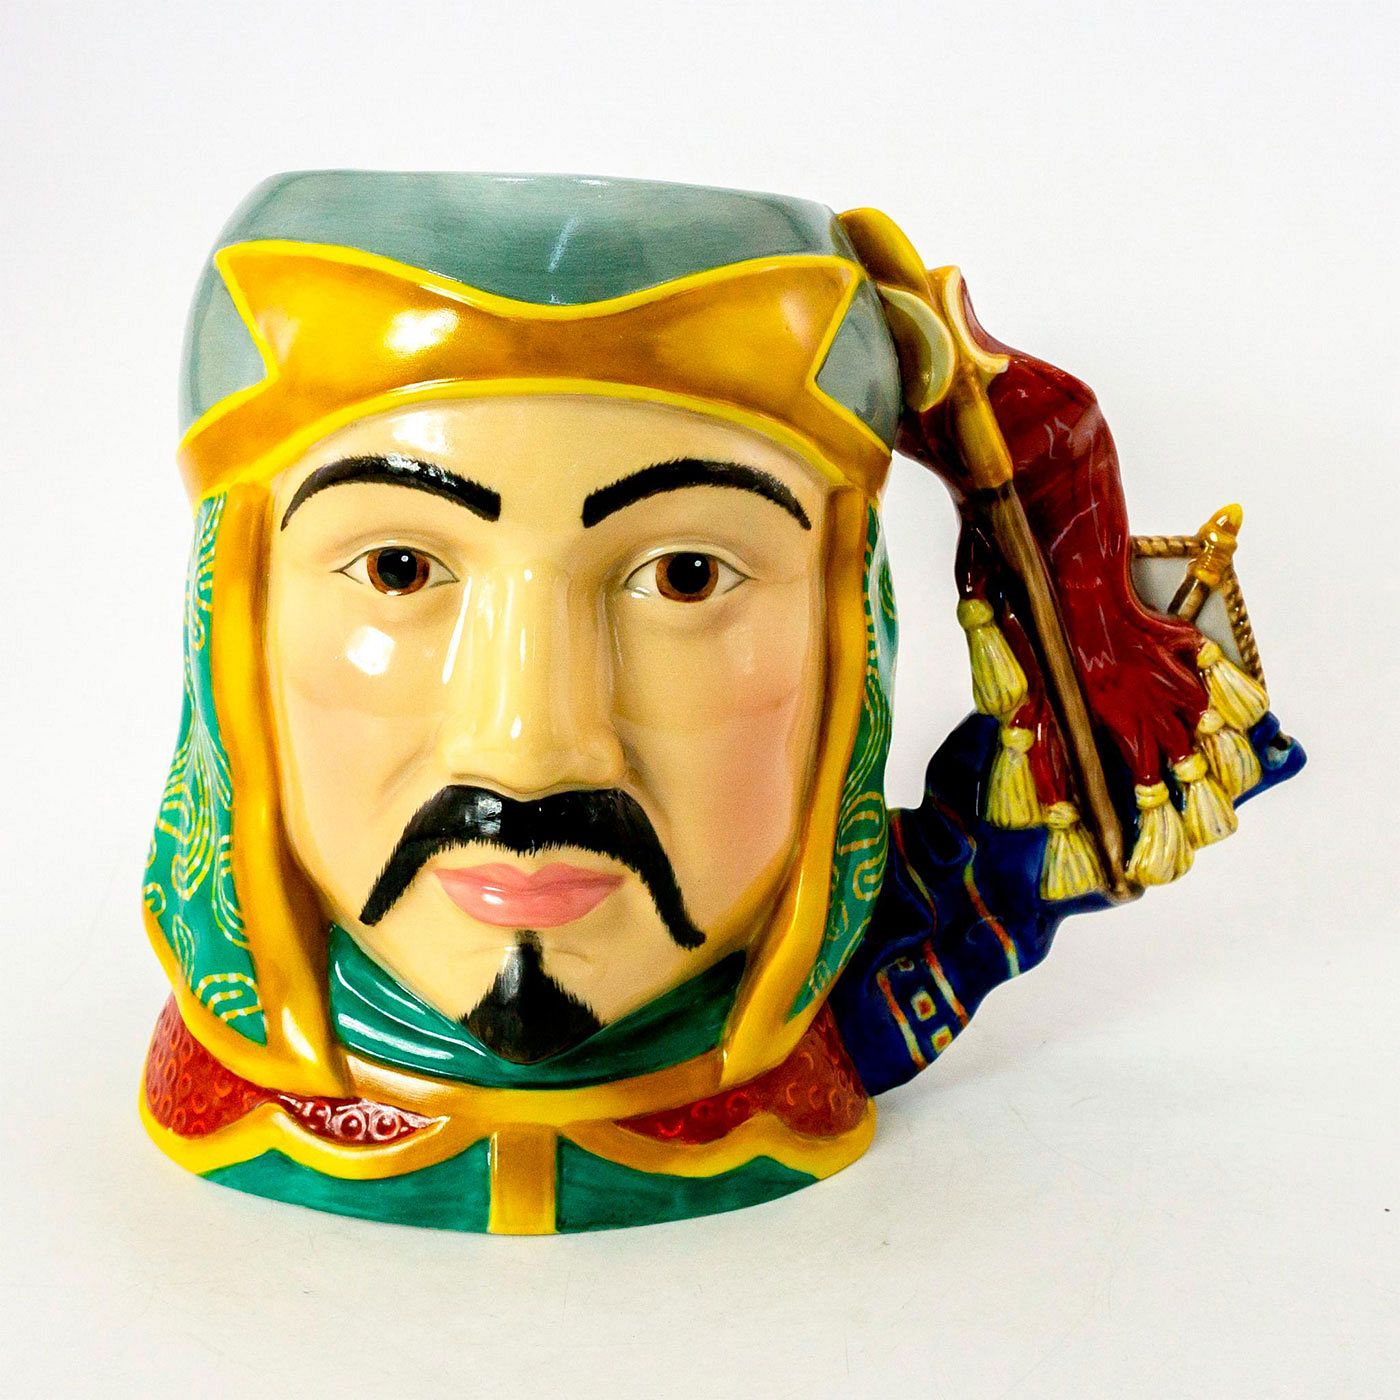 Genghis Khan D7222 - Large - Royal Doulton Character Jug sold at auction on  22nd June | Bidsquare